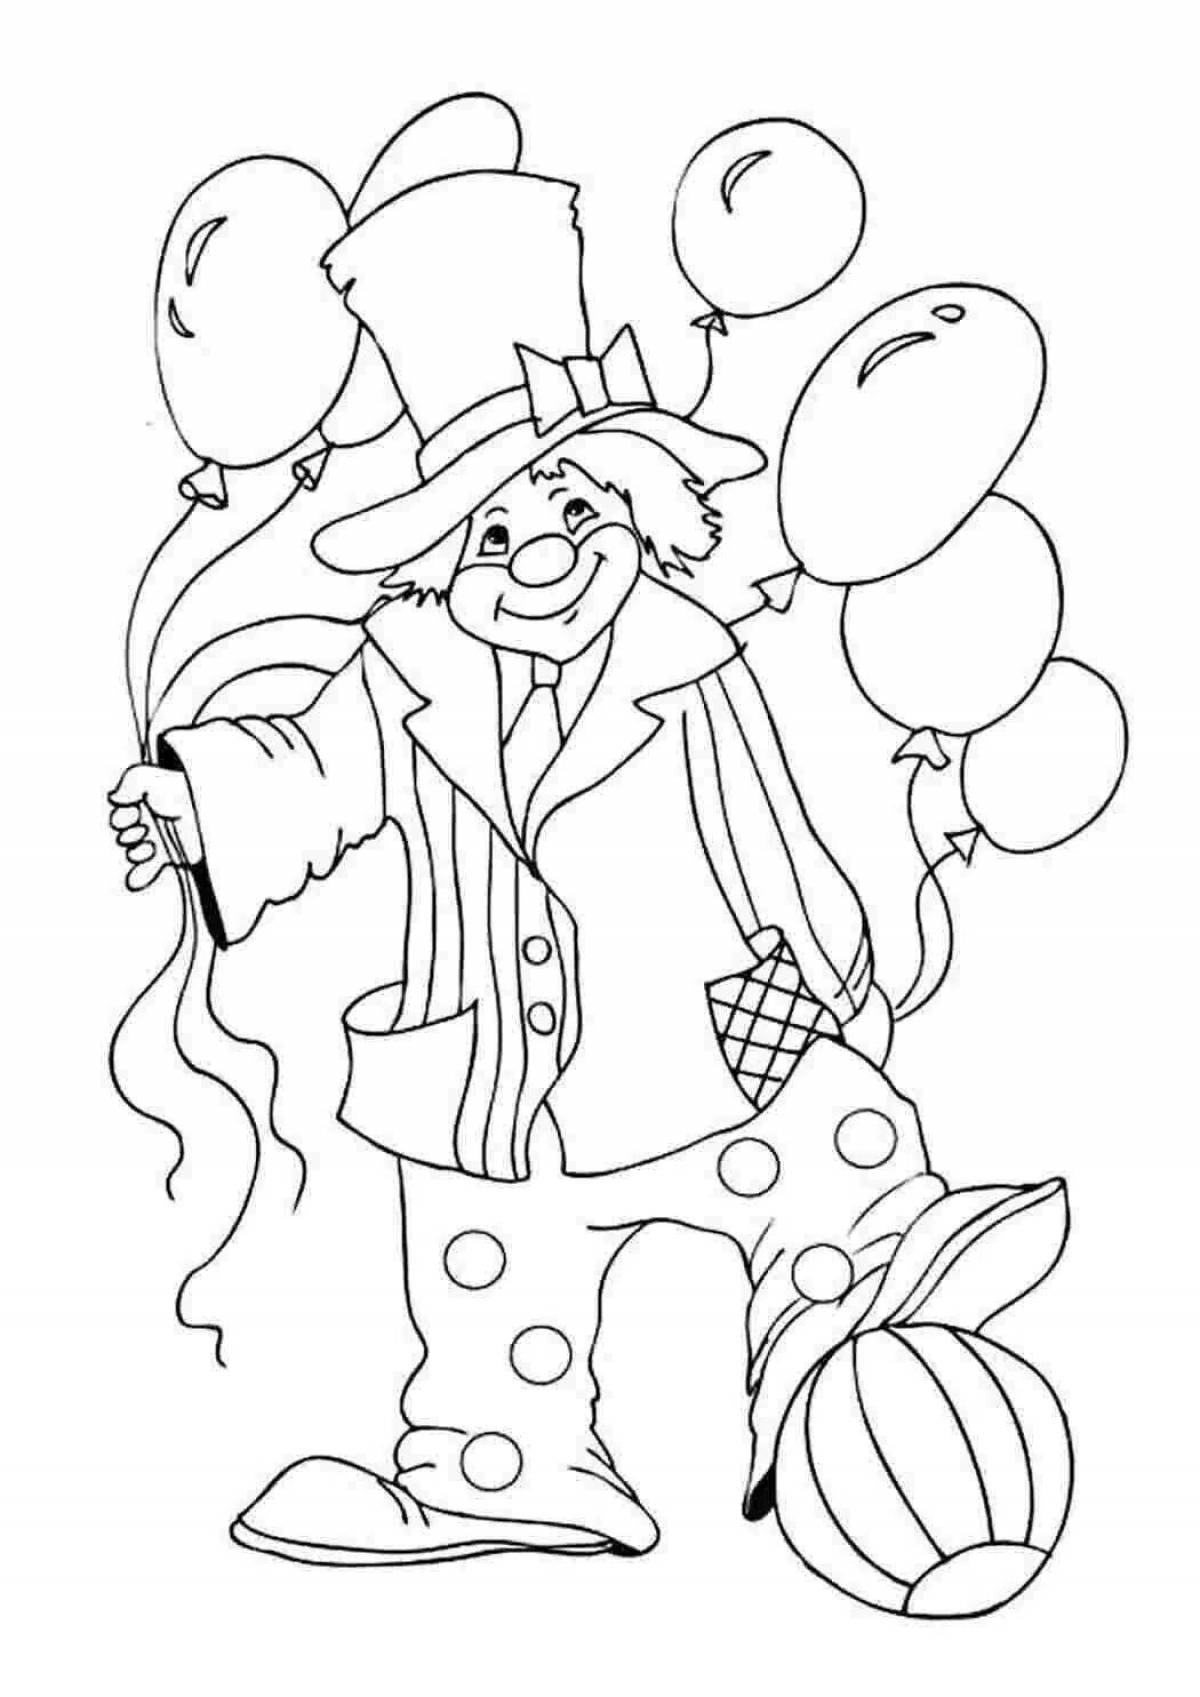 Funny clown coloring for children 6-7 years old